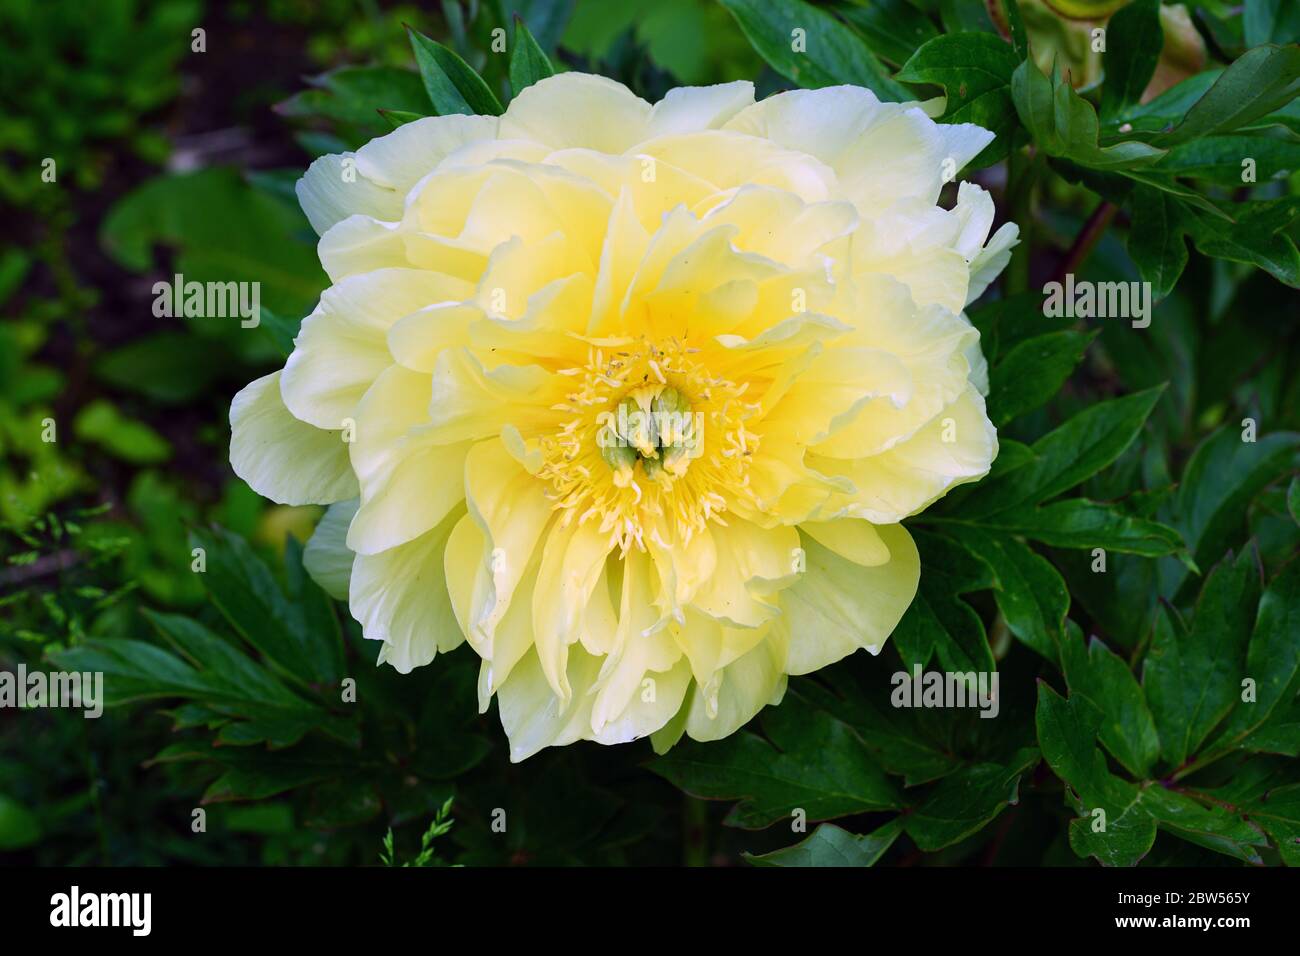 Yellow flower of a Bartzella Itoh peony plant, a cross between a tree peony and herbaceous peony Stock Photo